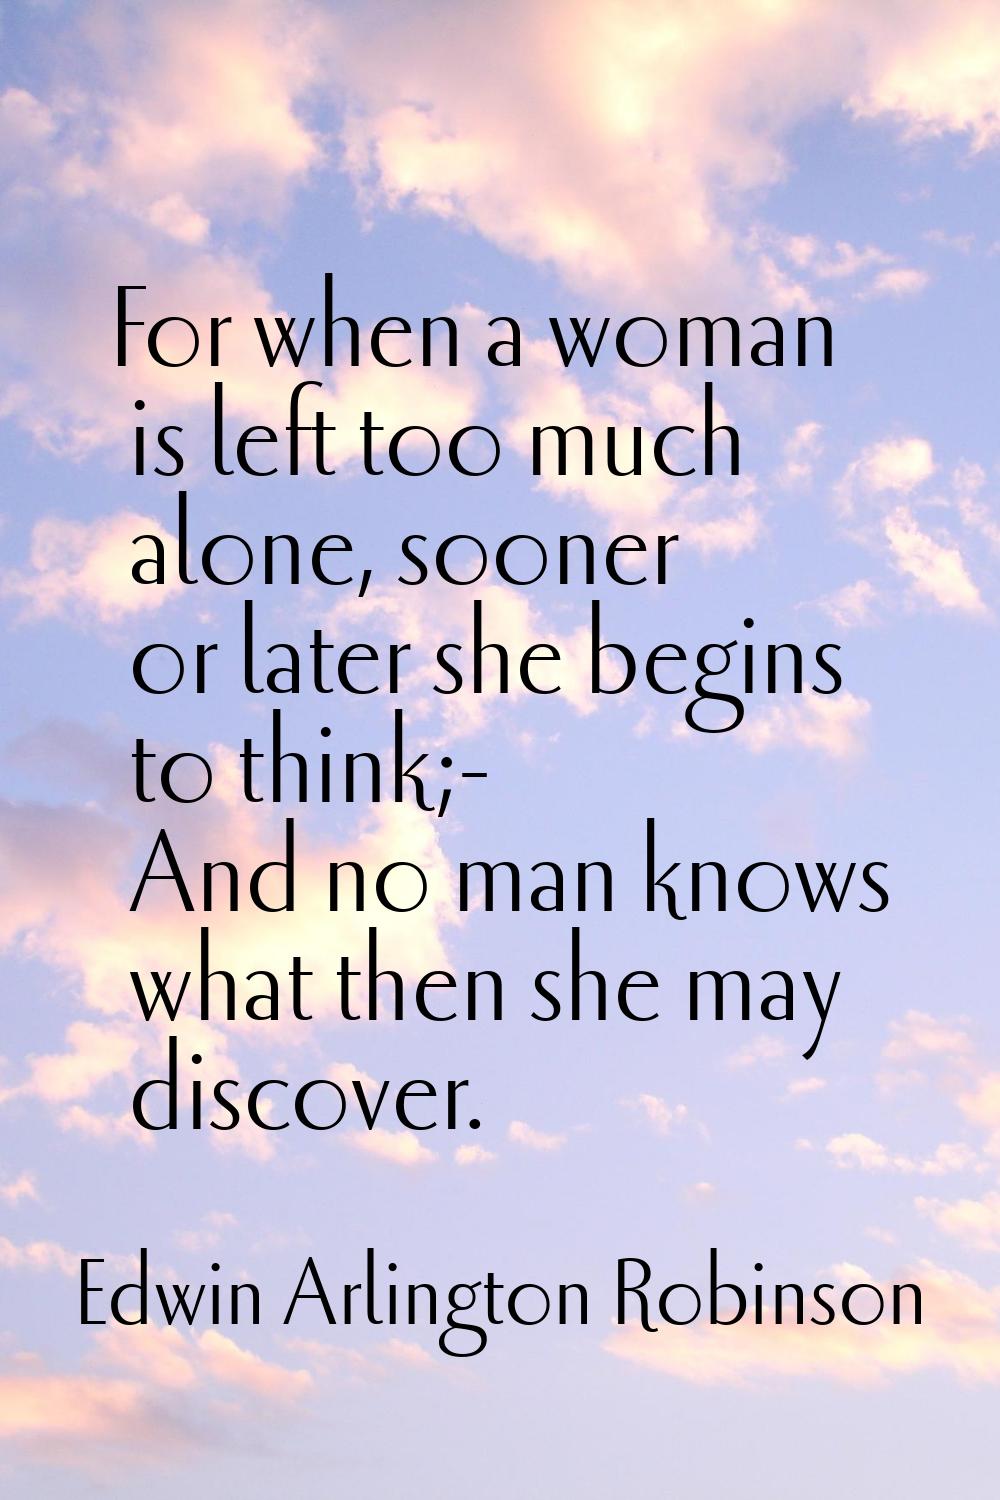 For when a woman is left too much alone, sooner or later she begins to think;- And no man knows wha